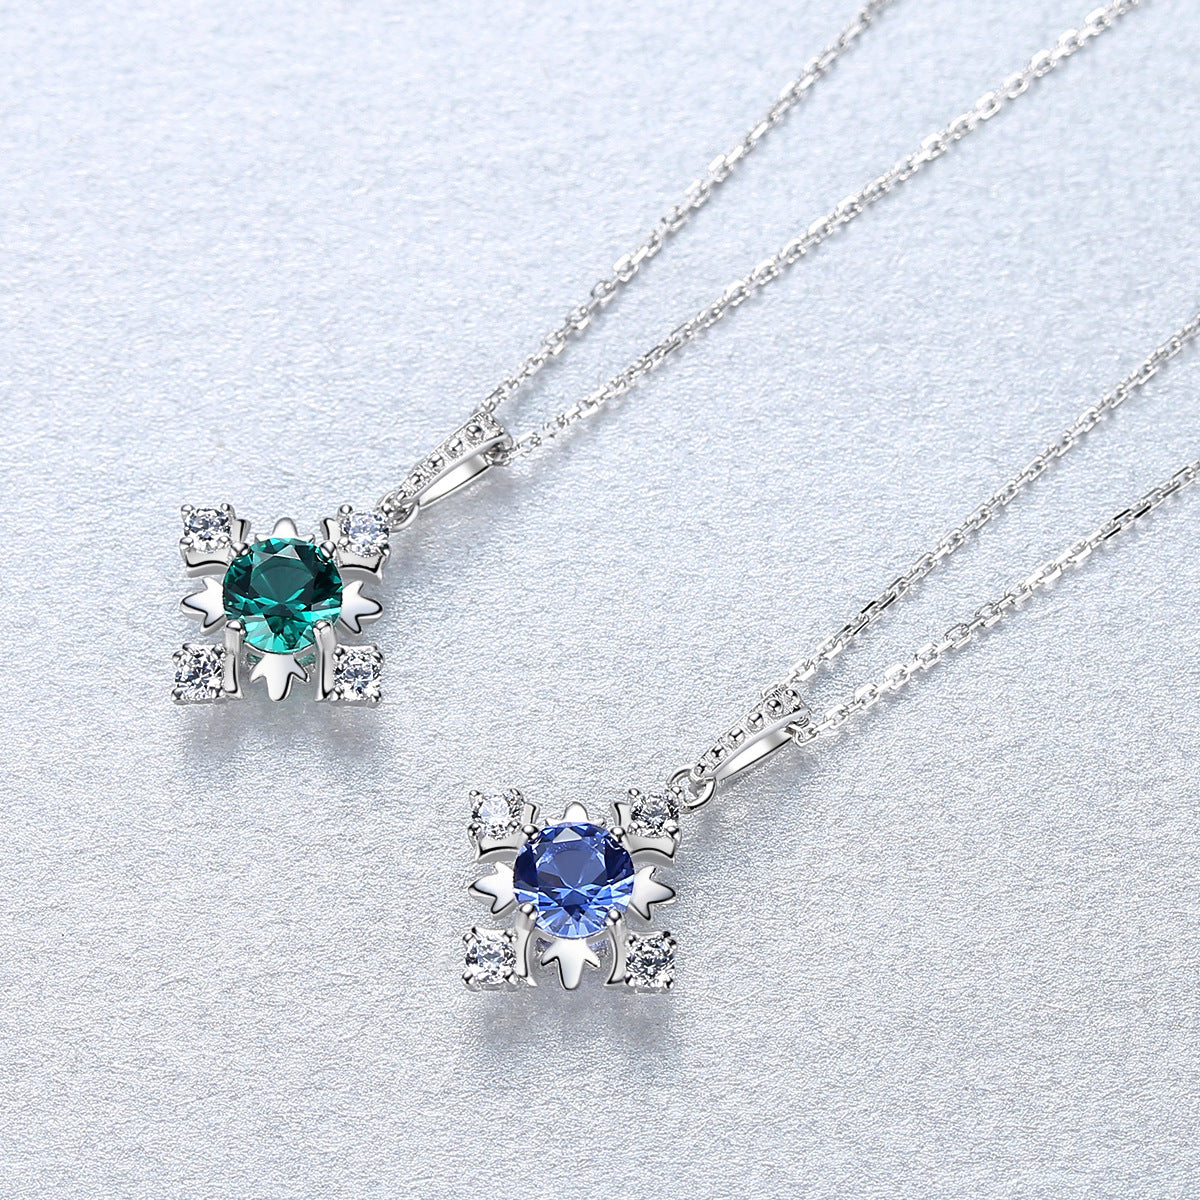 Gemstonely- Sterling Silver Necklace with Colored Simulate Gemstones and Diamonds (Cubic Zirconia)